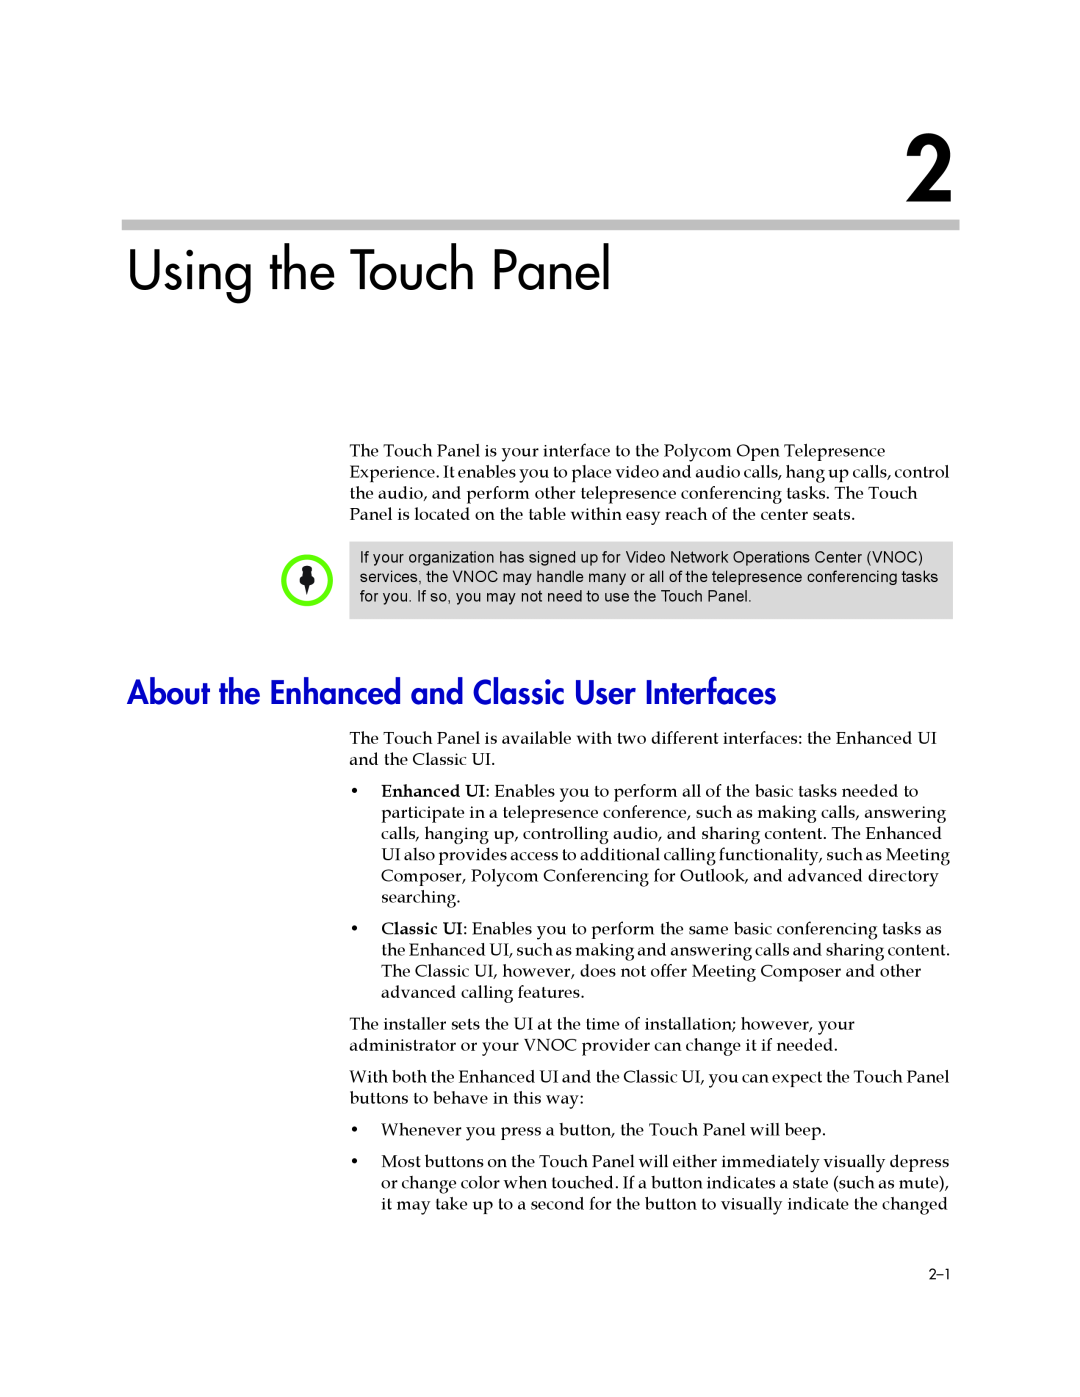 Polycom 300 manual Using the Touch Panel, About the Enhanced and Classic User Interfaces 